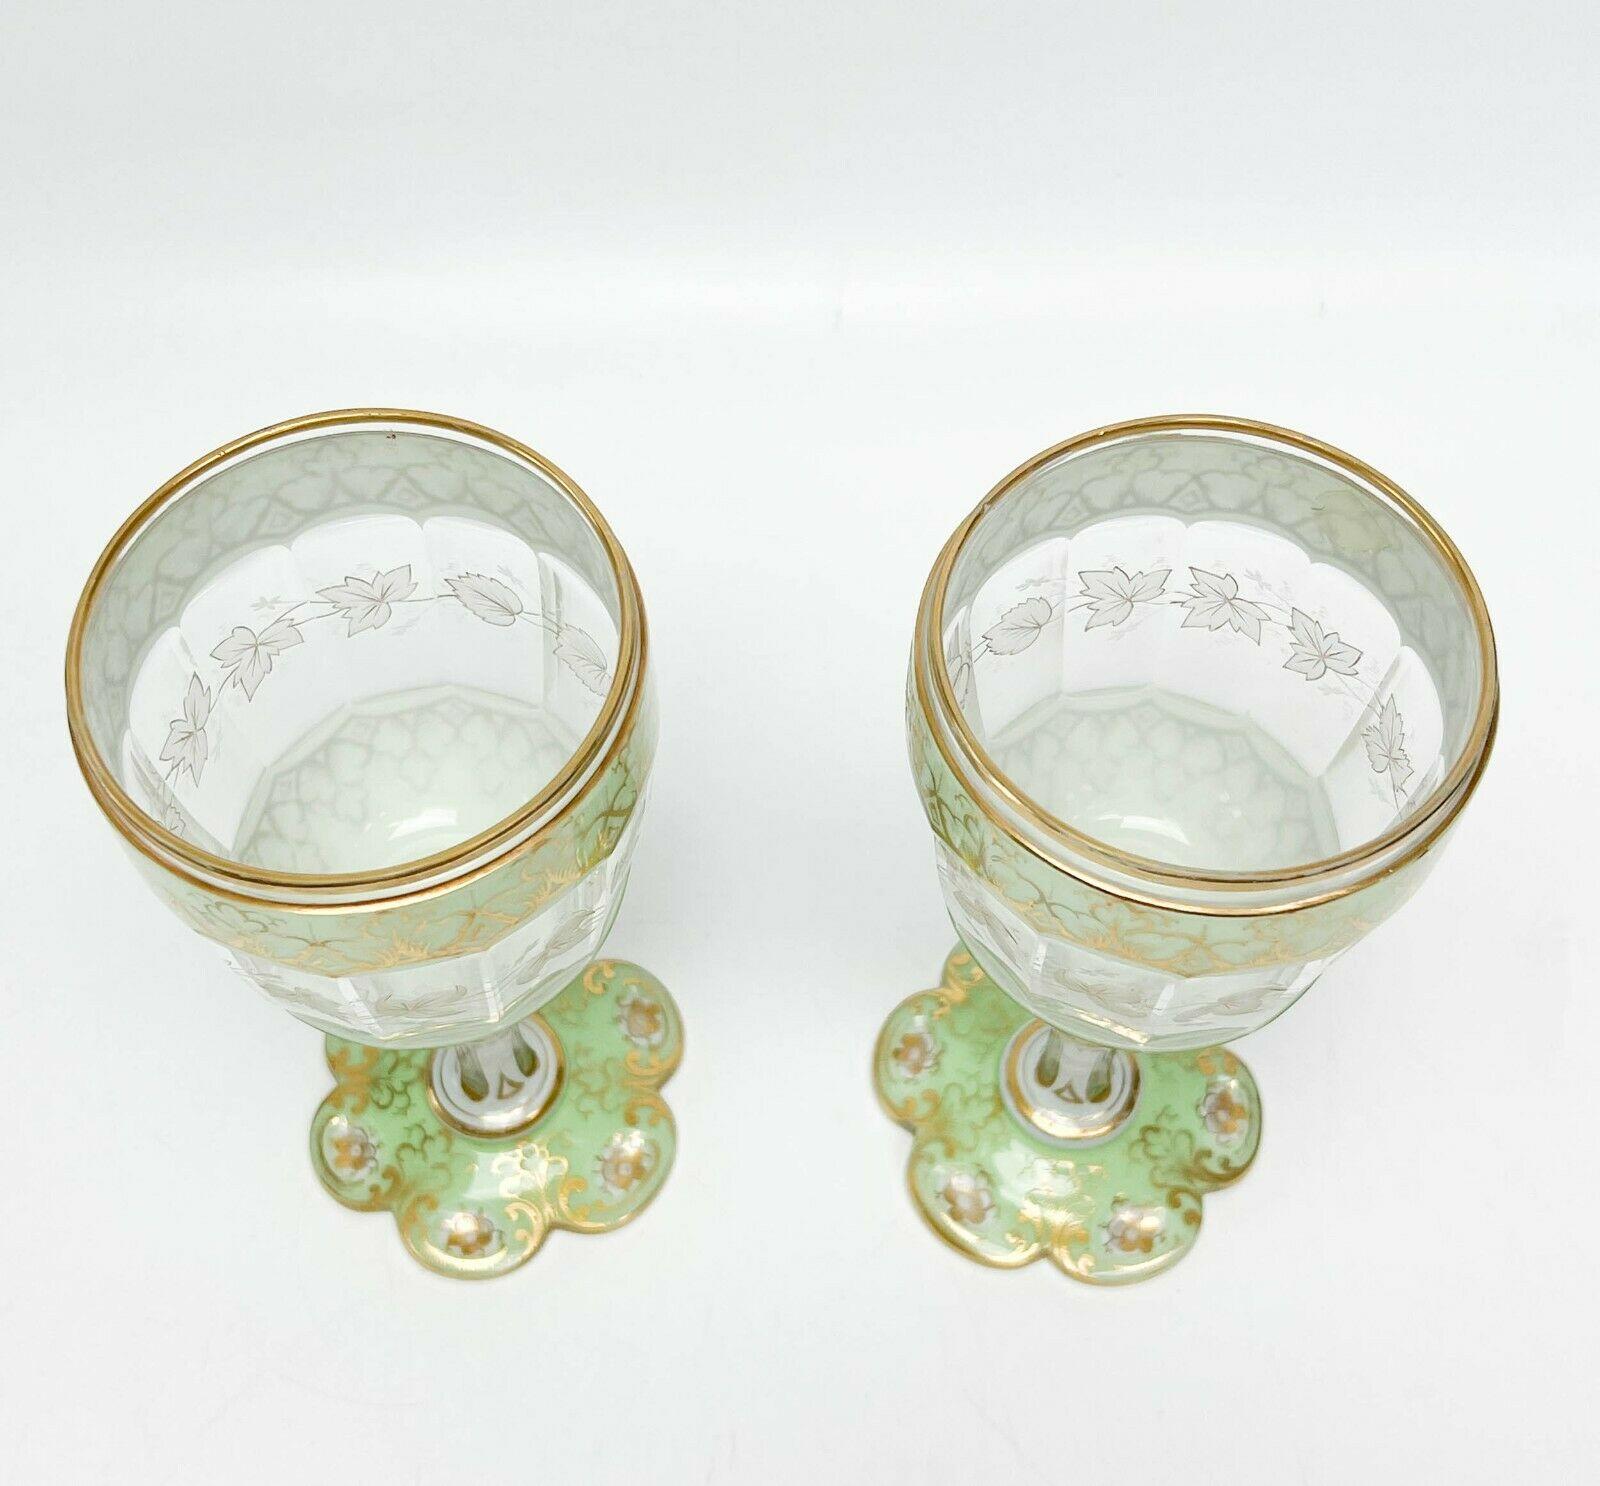 Pair bohemian 3 layer green white cut to clear glass goblets, 19th century.

Bowls with 3 layer green and white glass with cut to clear panels, stem with 2 layer white cut to clear panels. Bowl stem and base were all blown separately. Stem with